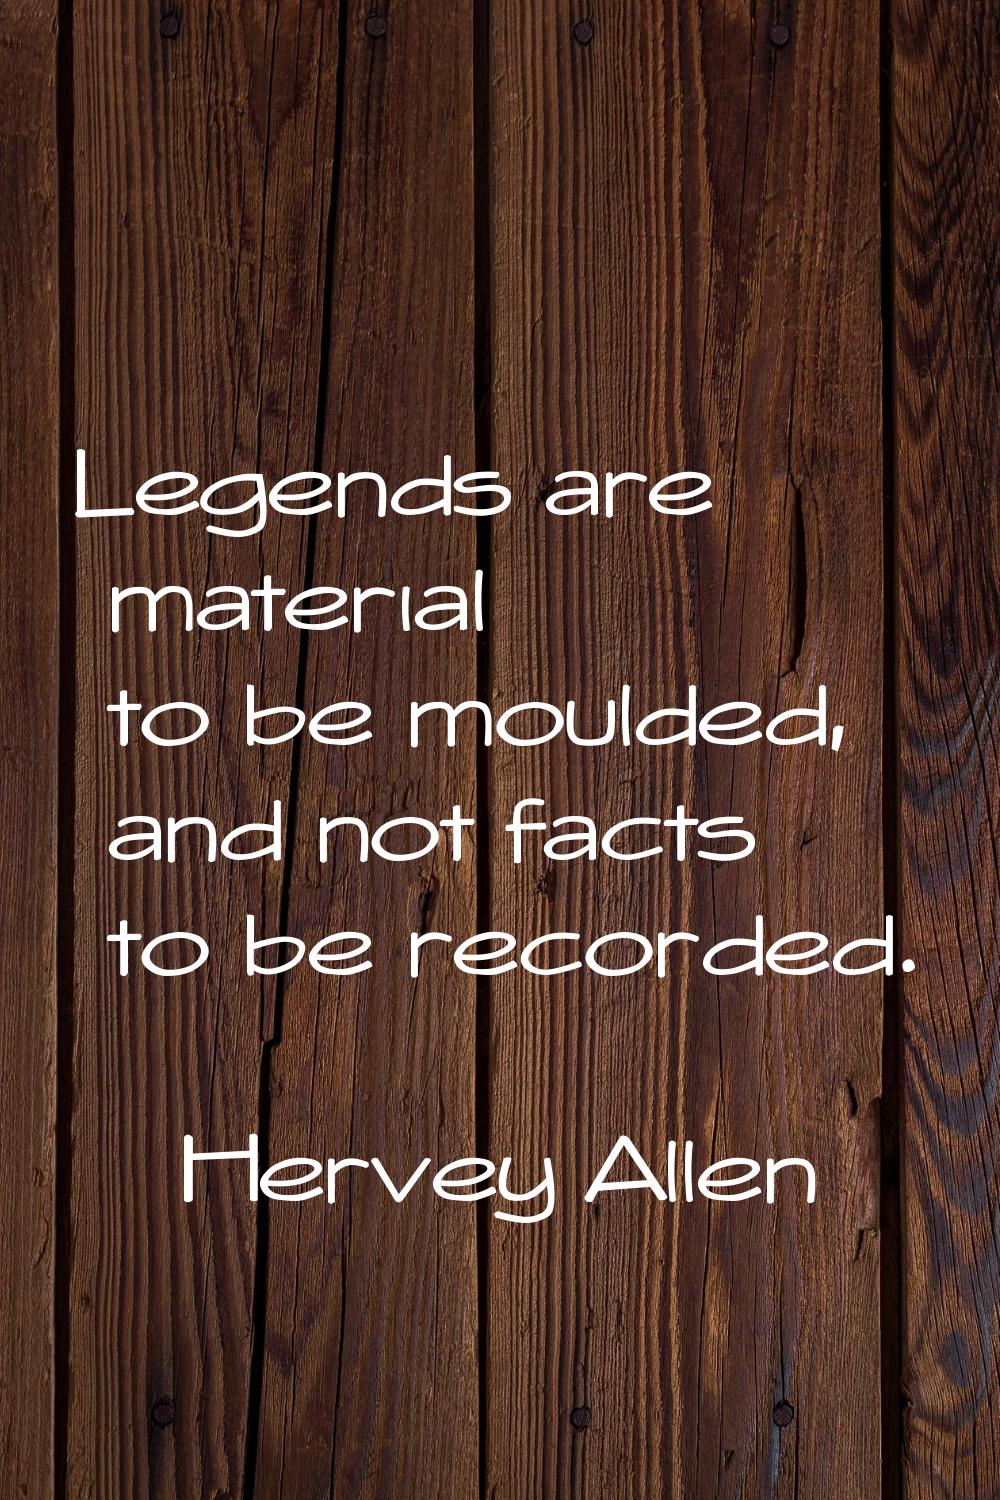 Legends are material to be moulded, and not facts to be recorded.